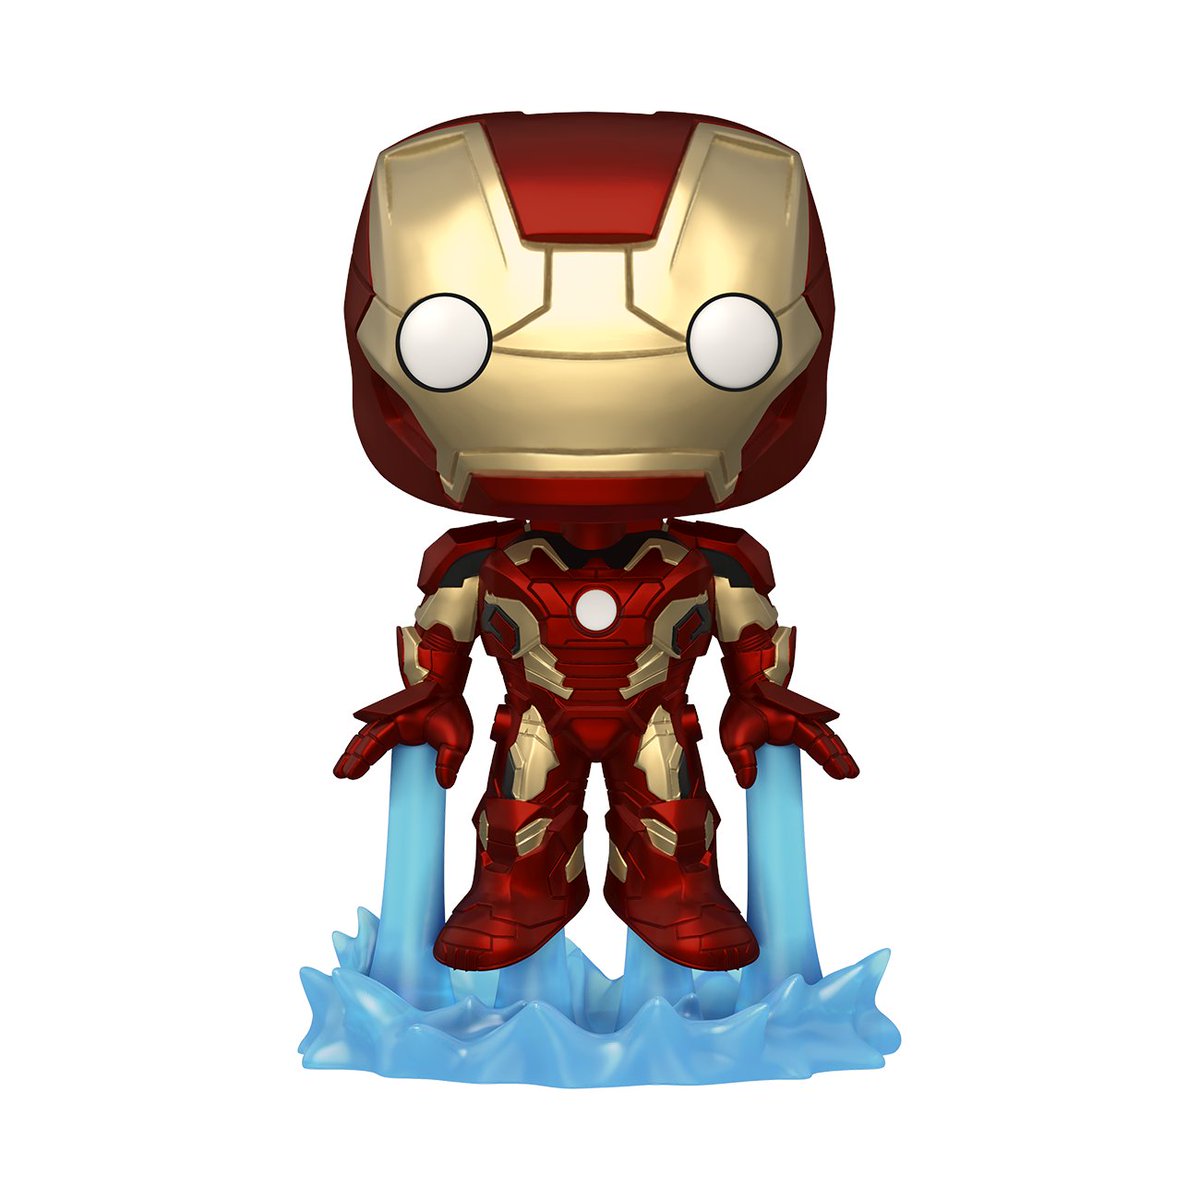 RT and follow @OriginalFunko for the chance to WIN the @Gamestop exclusive Marvel Studios' Avengers: Age of Ultron Iron Man Mark 43 GITD Pop! Jumbo! Not feeling lucky? Pre-order here: bit.ly/3Ay61dn #Funko #FunkoPop #MarvelMustHaves #Avengers @Marvel